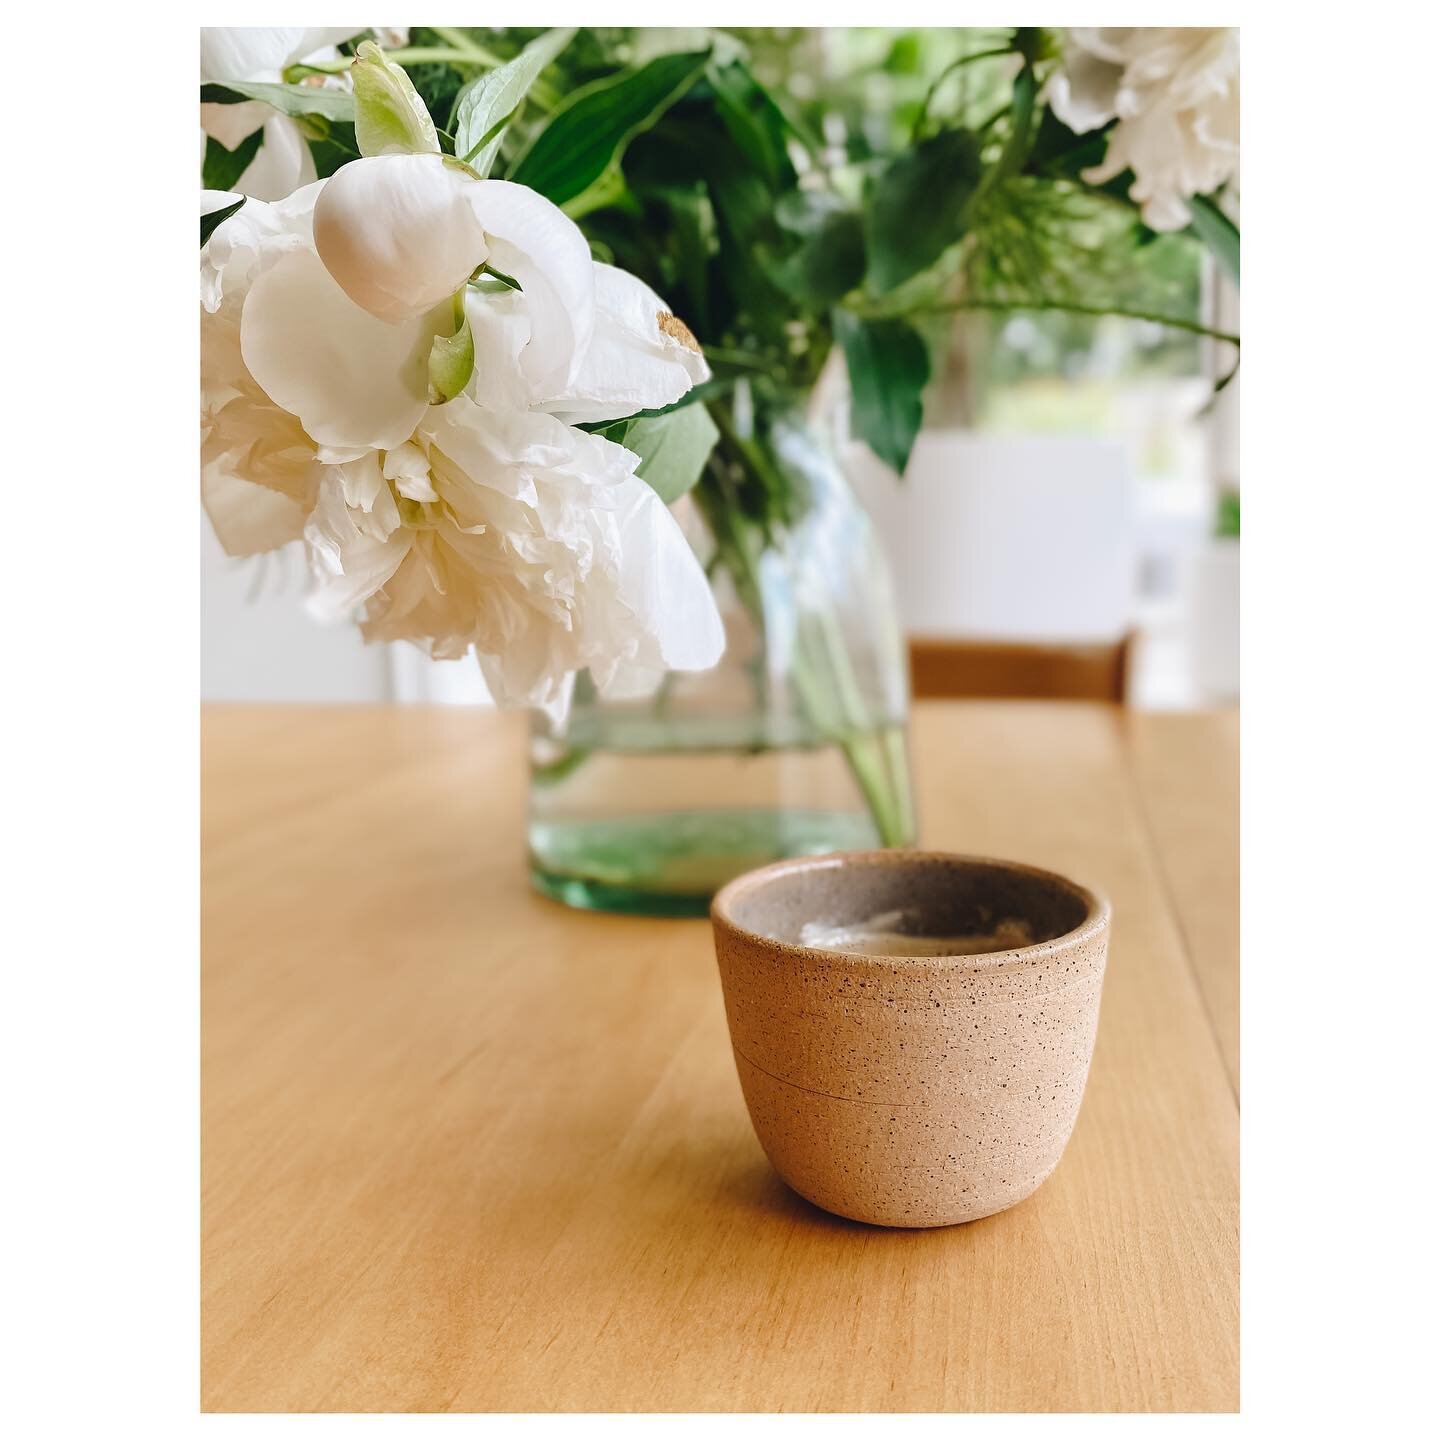 Pottery and peonies